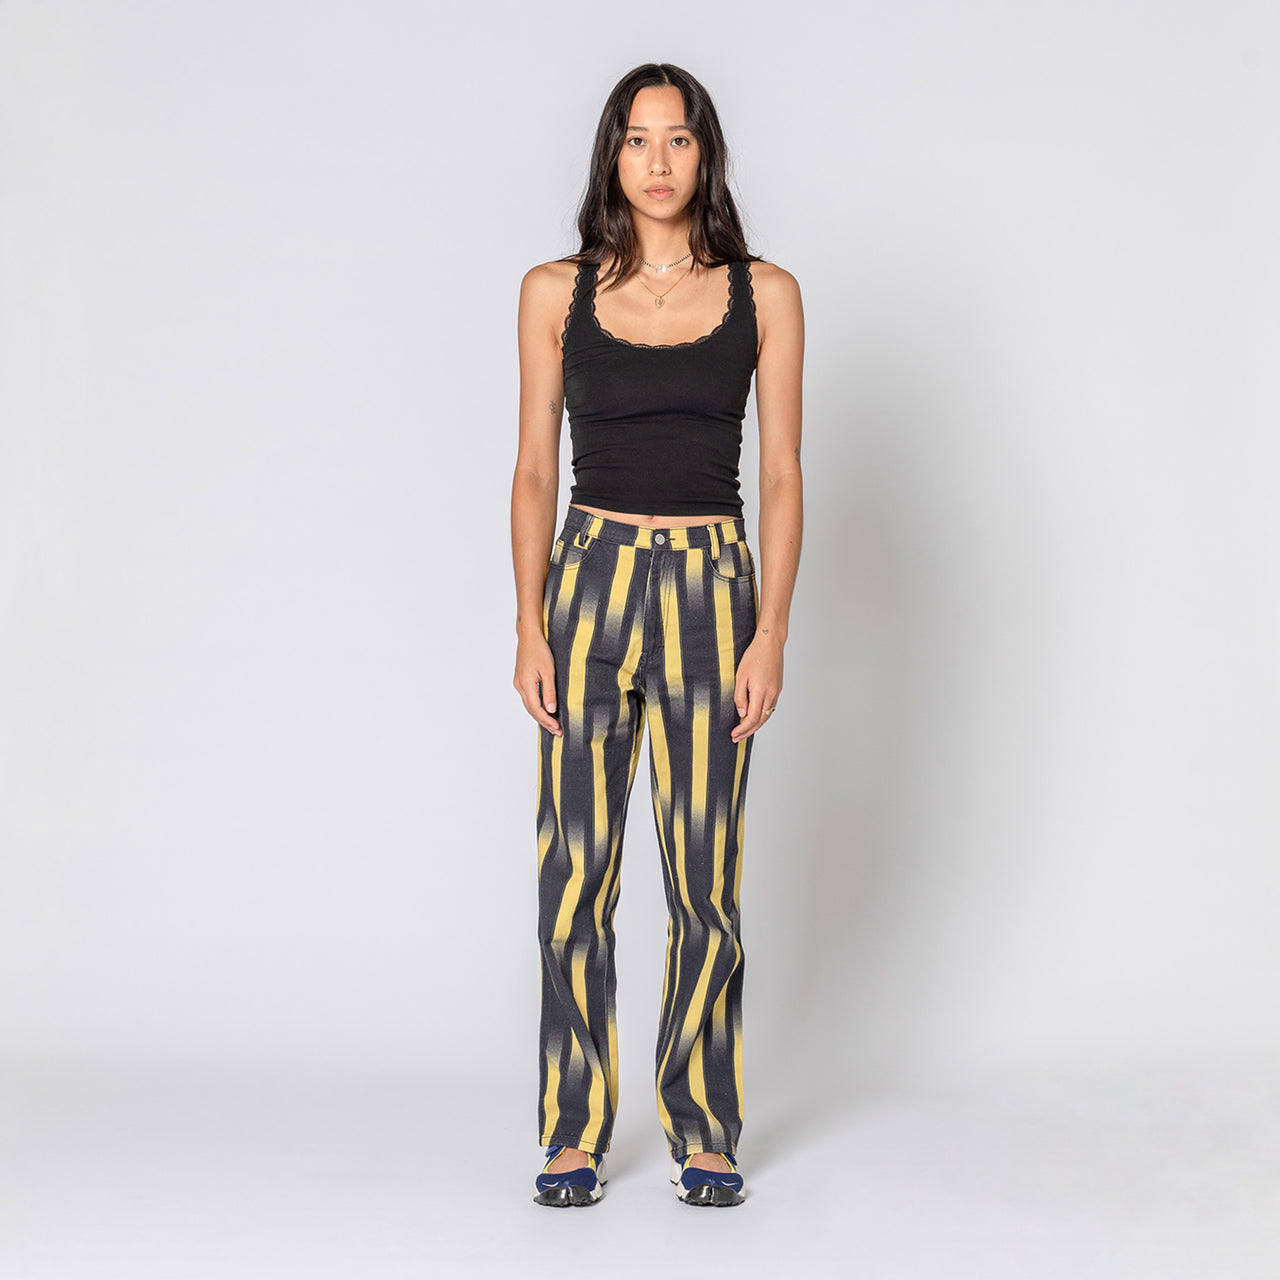 GHOST STRIPE YELLOW PARTY PANTS